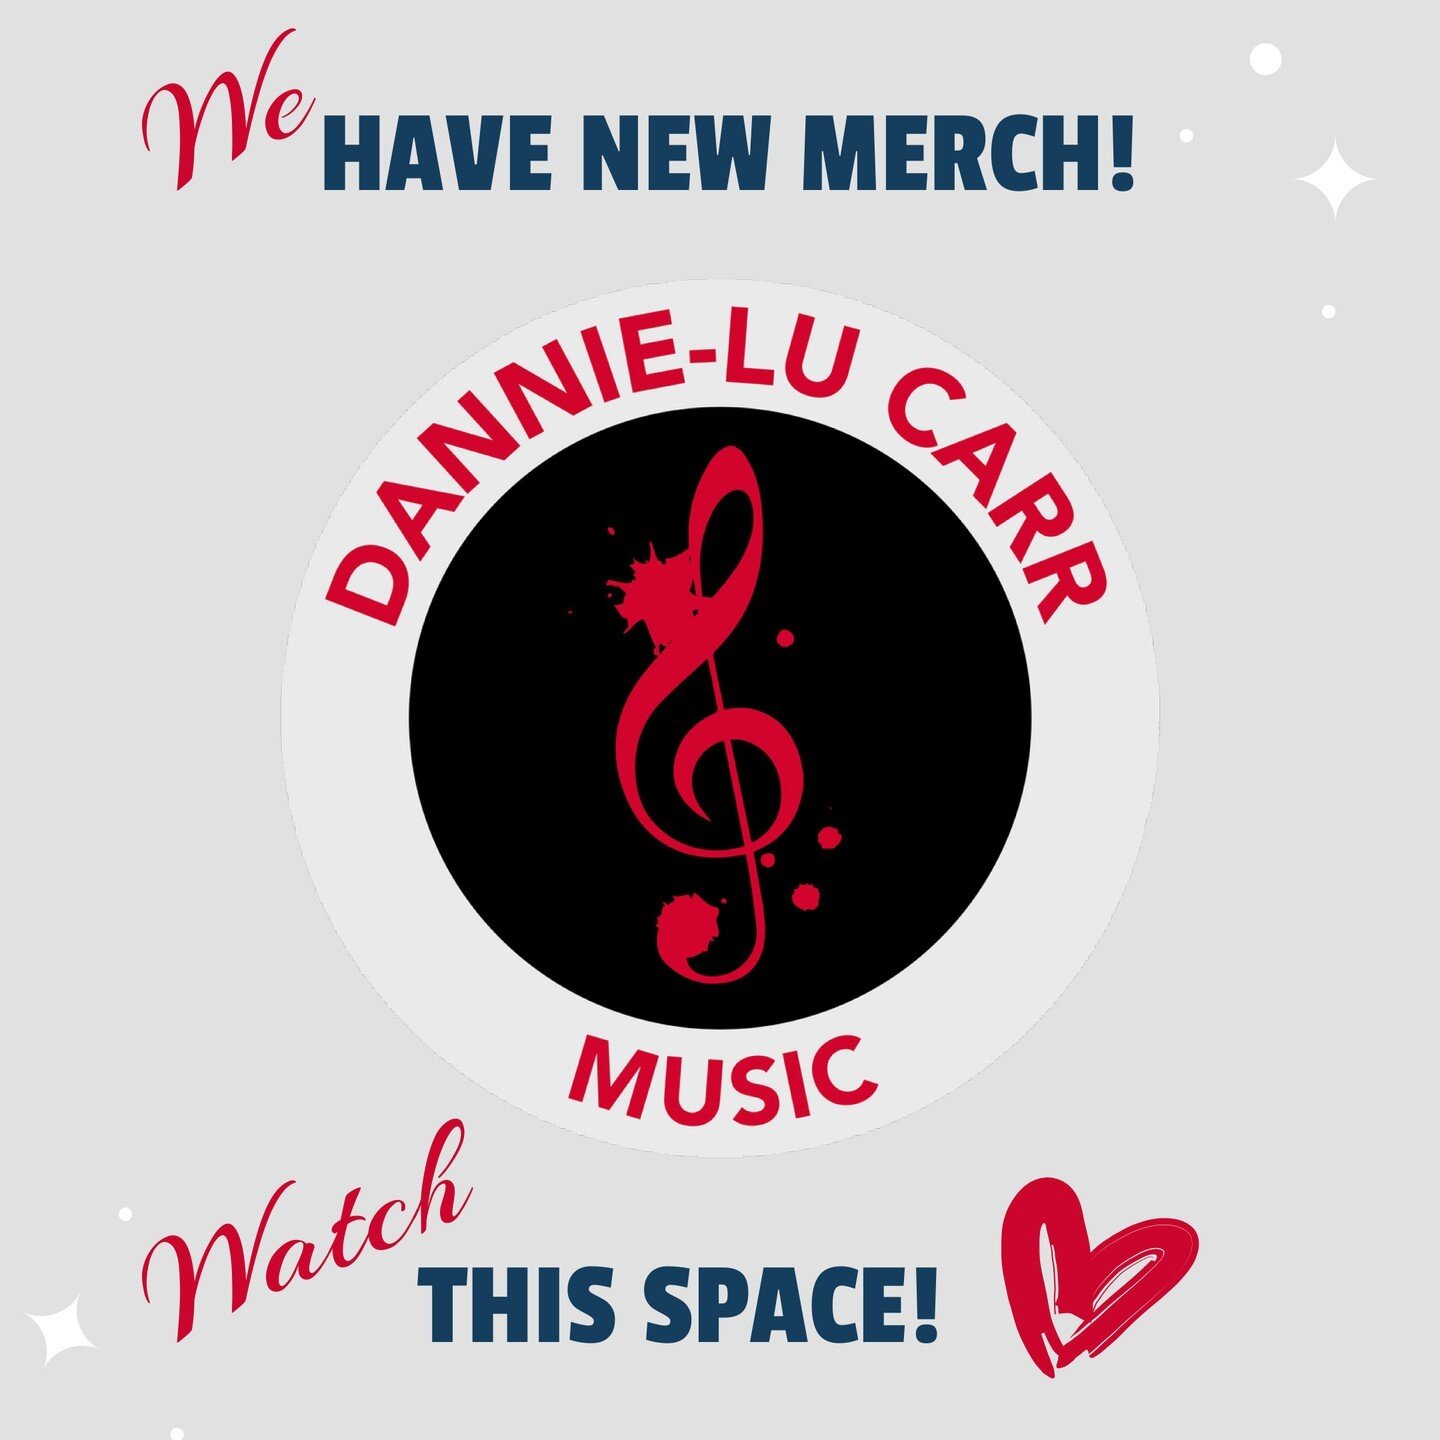 How cool! New merch now available to strut your funky stuff in...will reveal all soon! ❤️ #chunkybittymermaidalbum

@pastiche_records
@southcoastsquared
@allaboutpromouk

#newmerch
#comingsoon
#excitingtimes
#chunkybittymermaid
#dannielucarrmusic